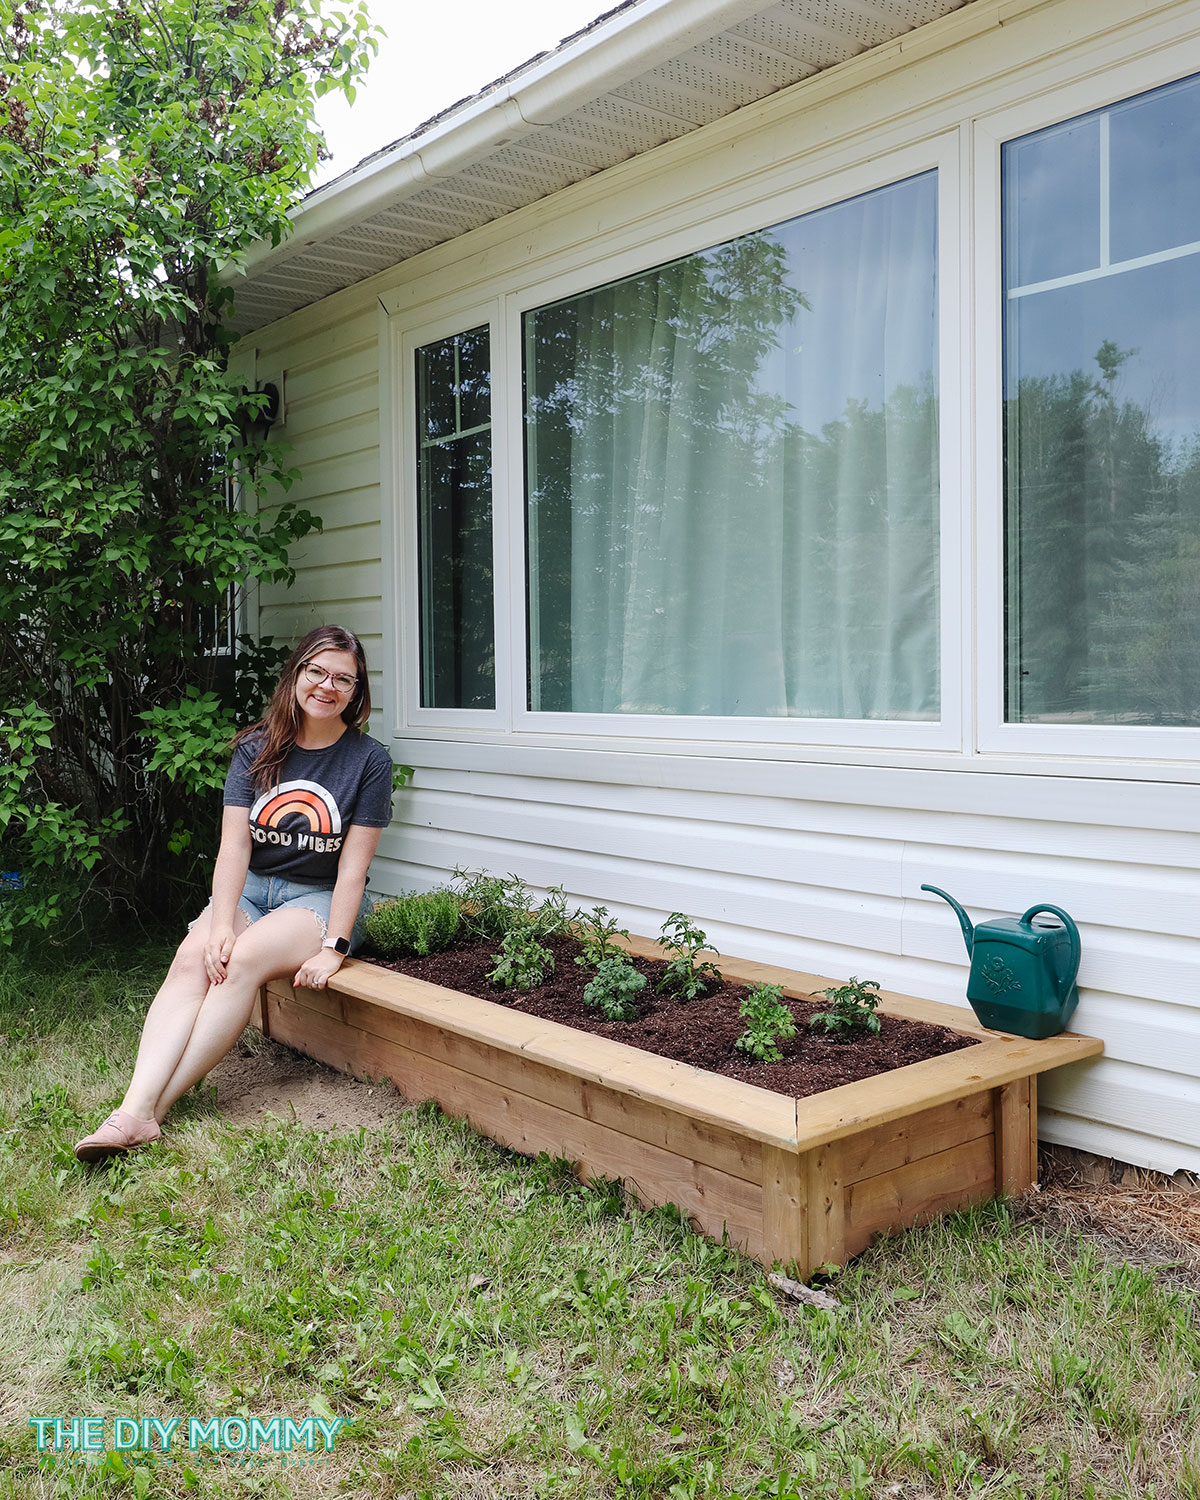 DIY Raised Garden Beds on a Budget – 3 Tools Only!